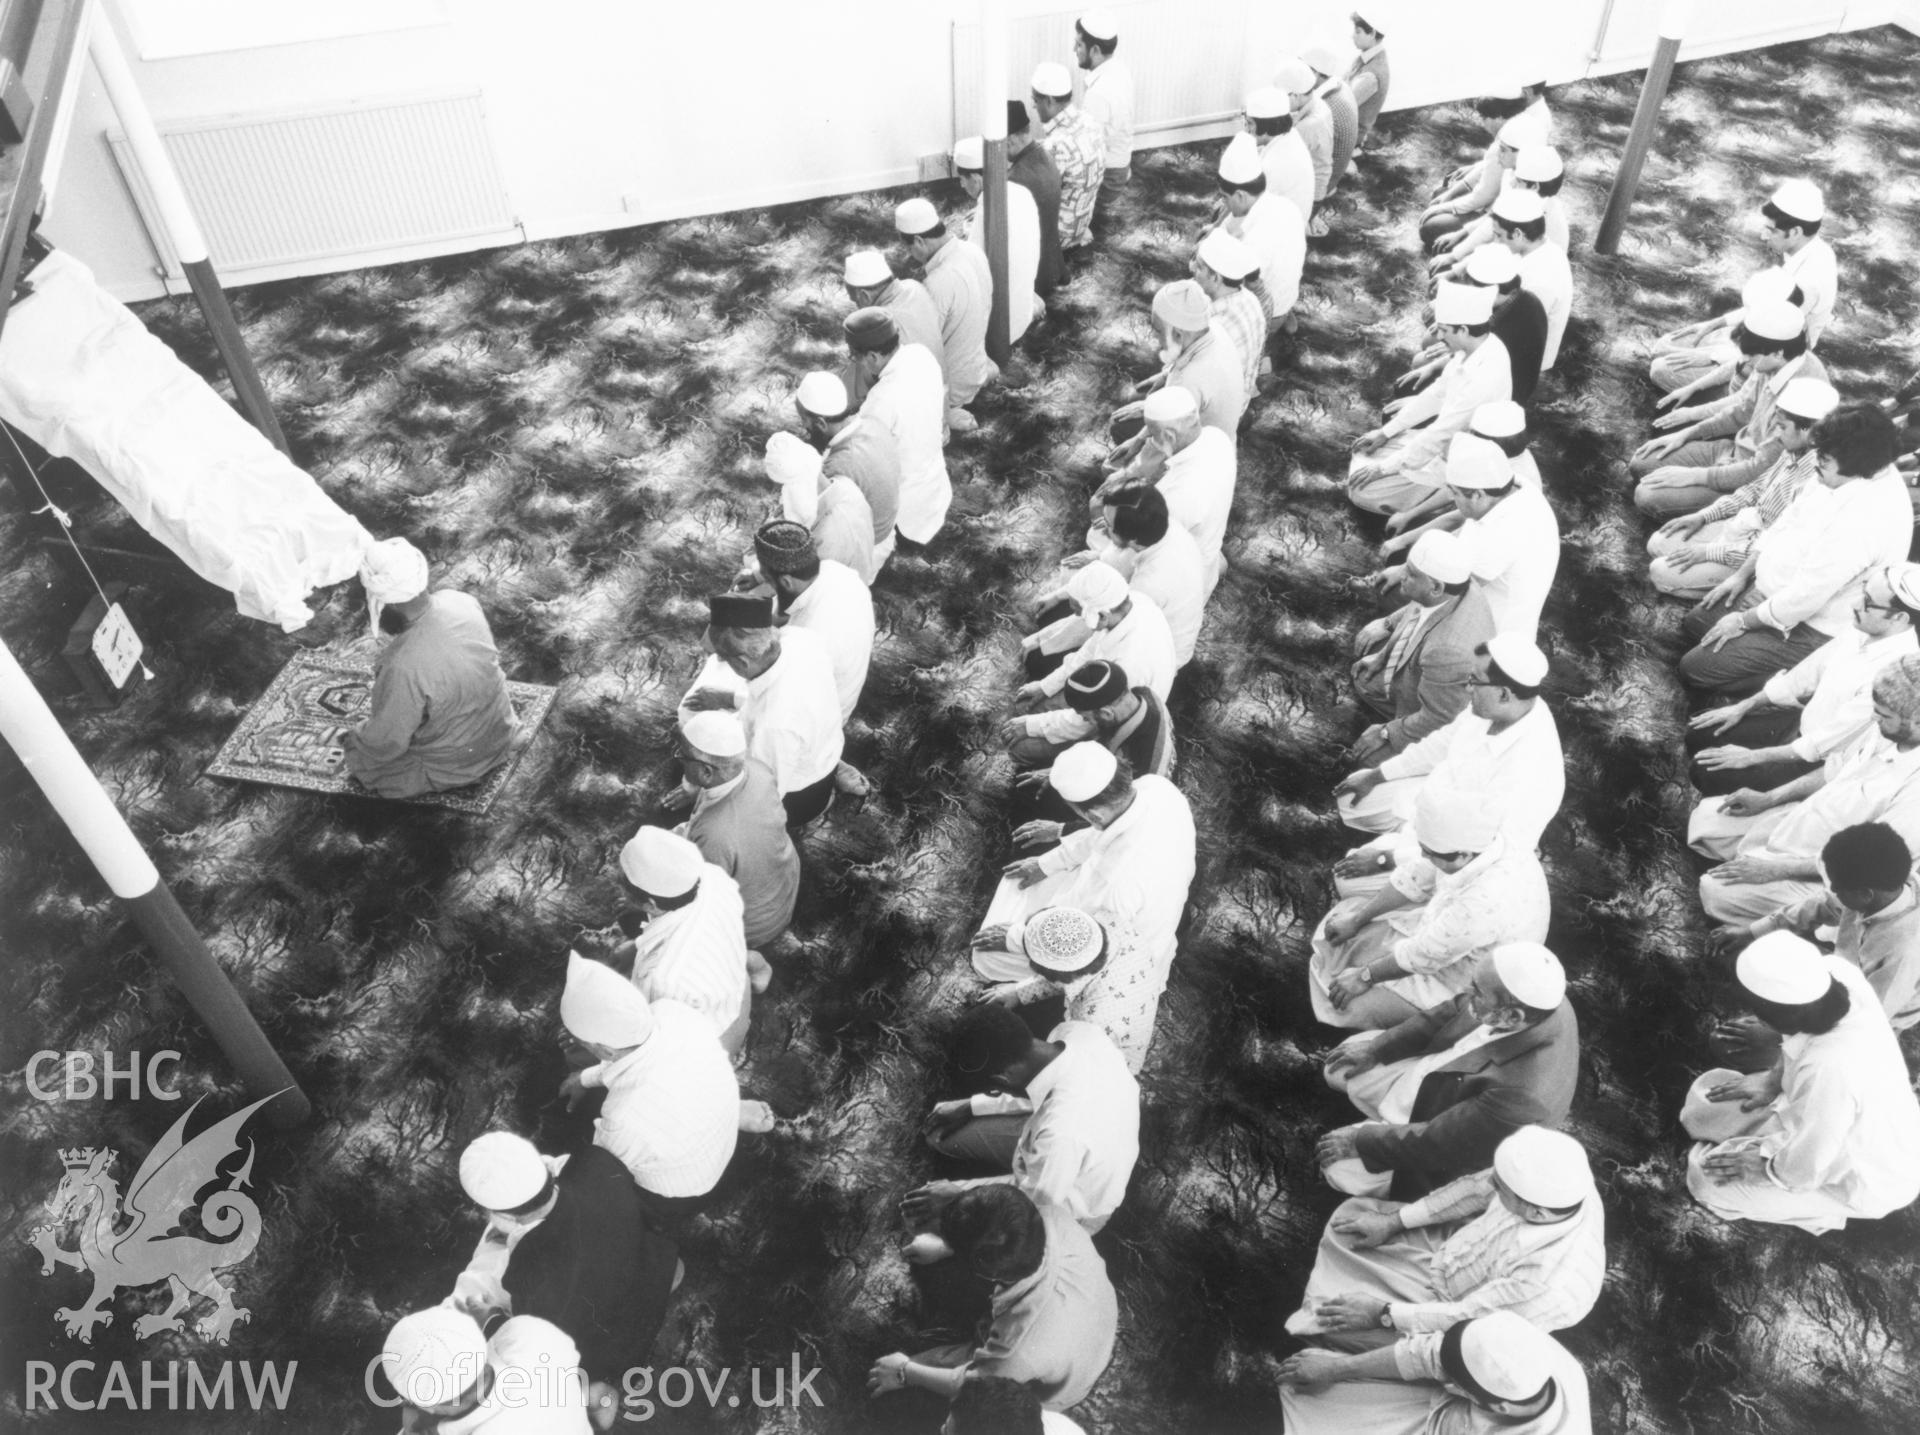 1 b/w print showing interior of Severn Road Mosque, Cardiff, with men and boys at prayer; collated by the former Central Office of Information.